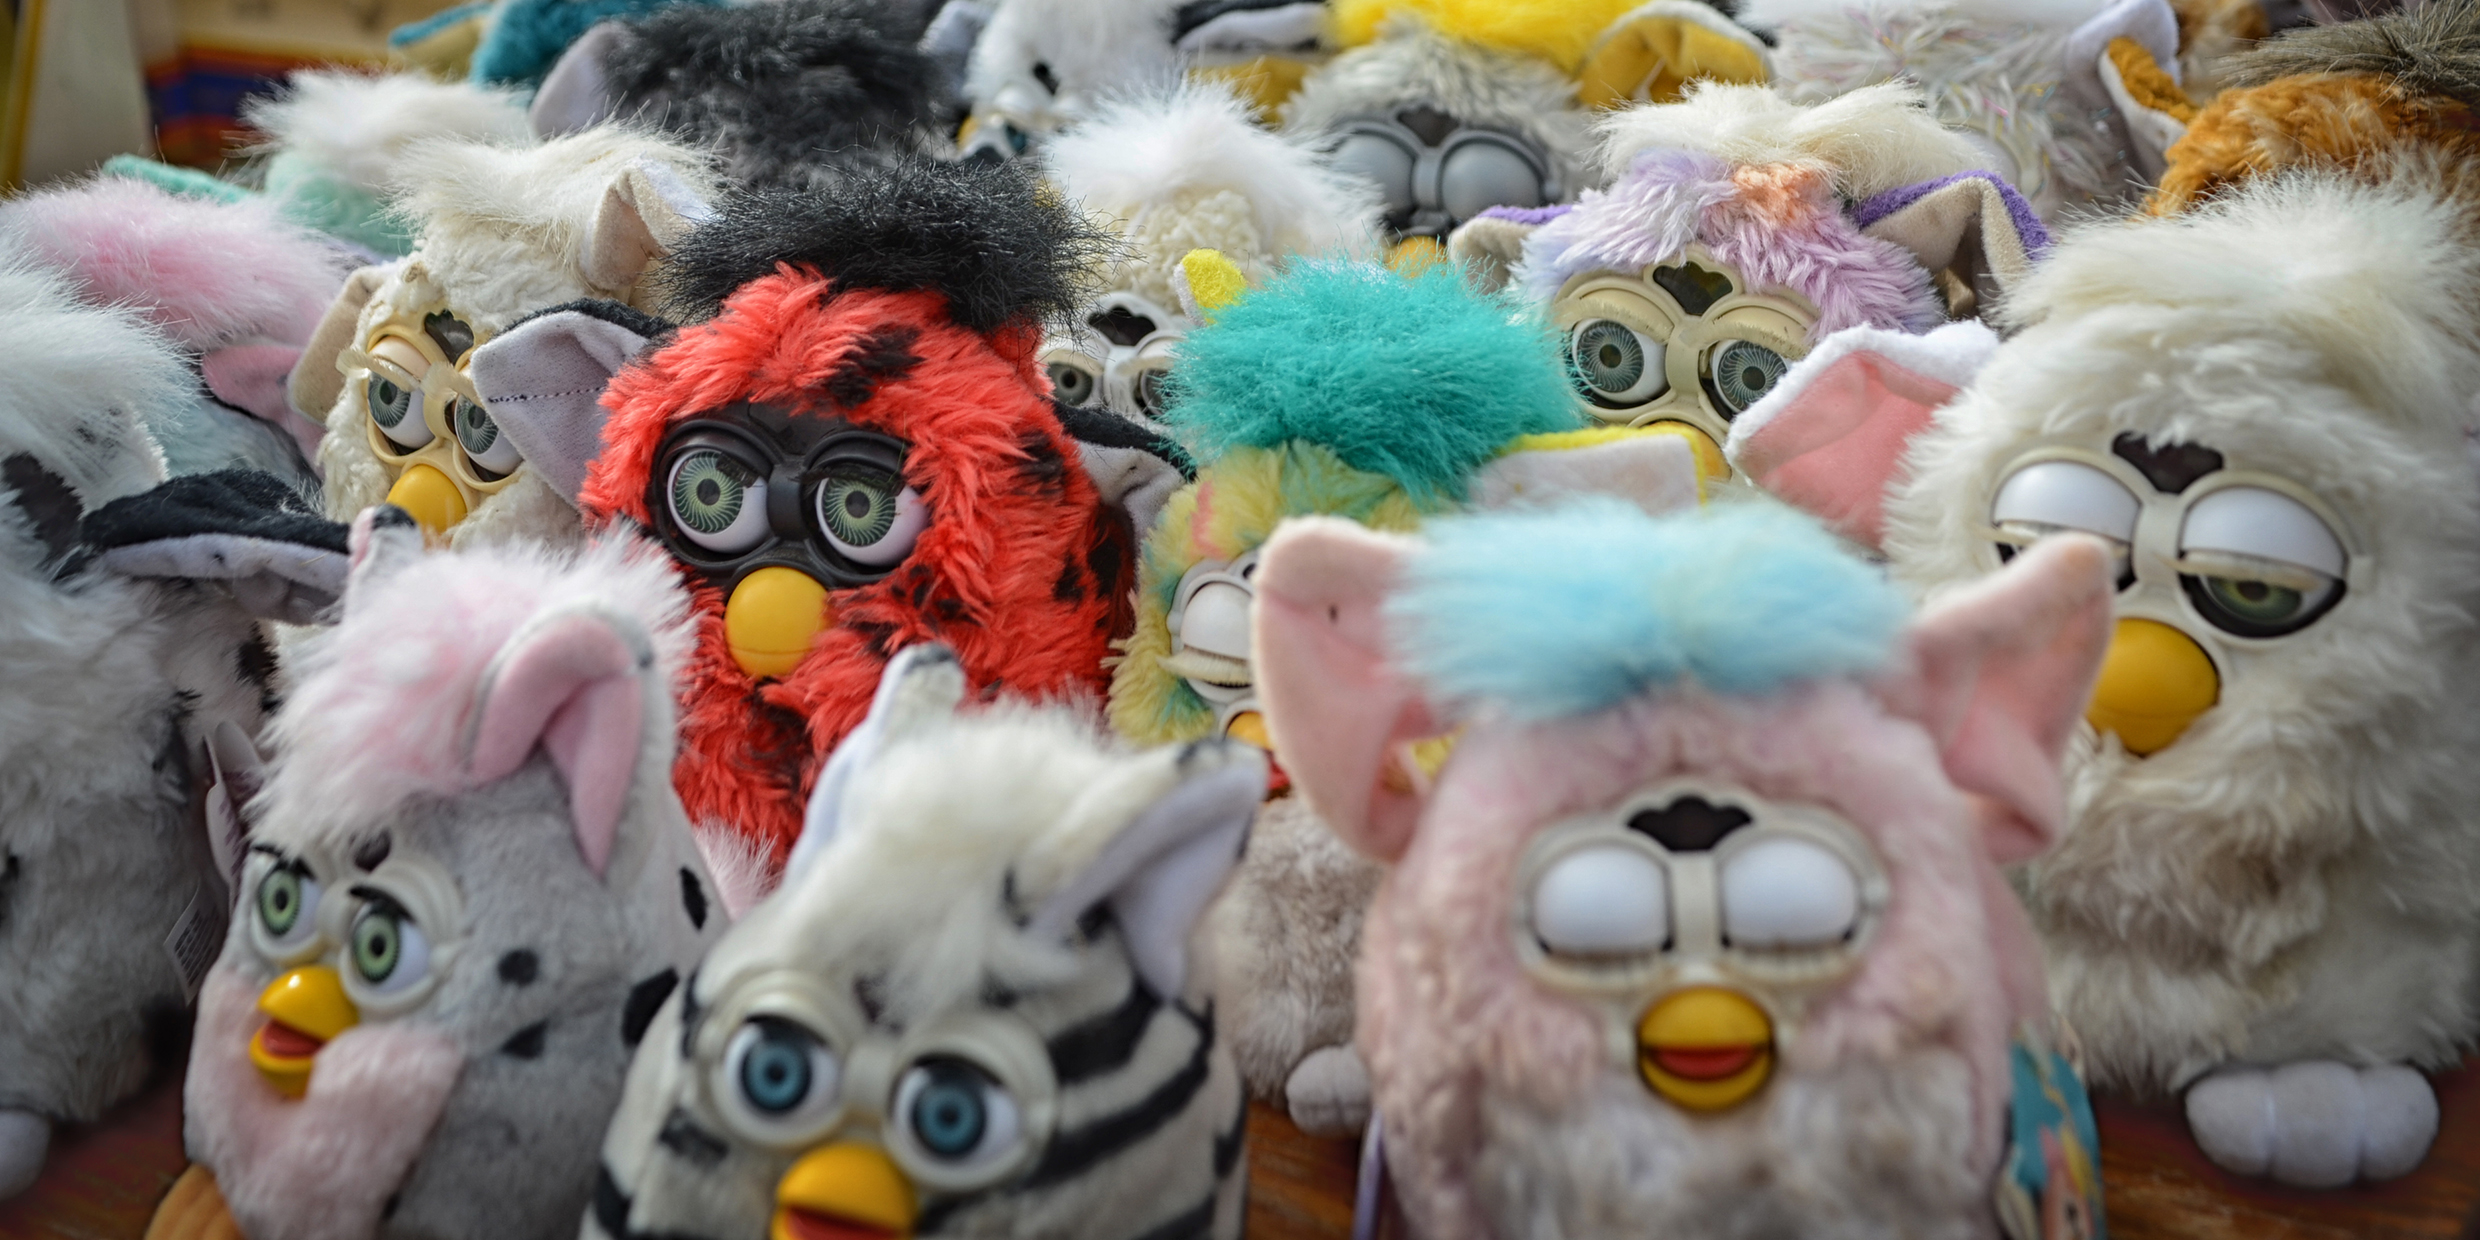 Image of a large collection of Furby dolls